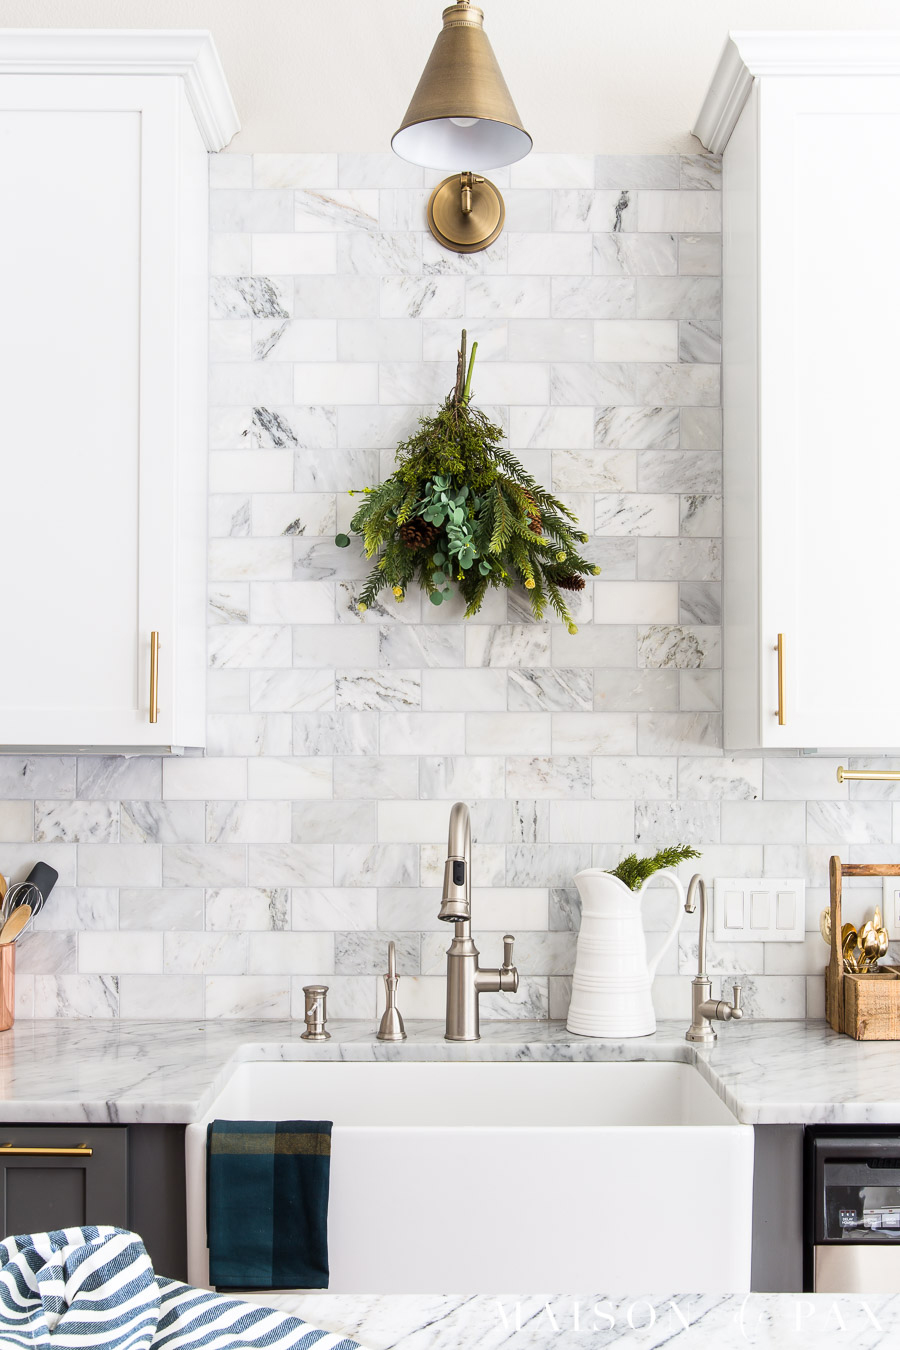 Christmas kitchen decor can be charming without being complicated. Use  these easy holiday decorating ideas to add some simple, natural, fresh  holiday